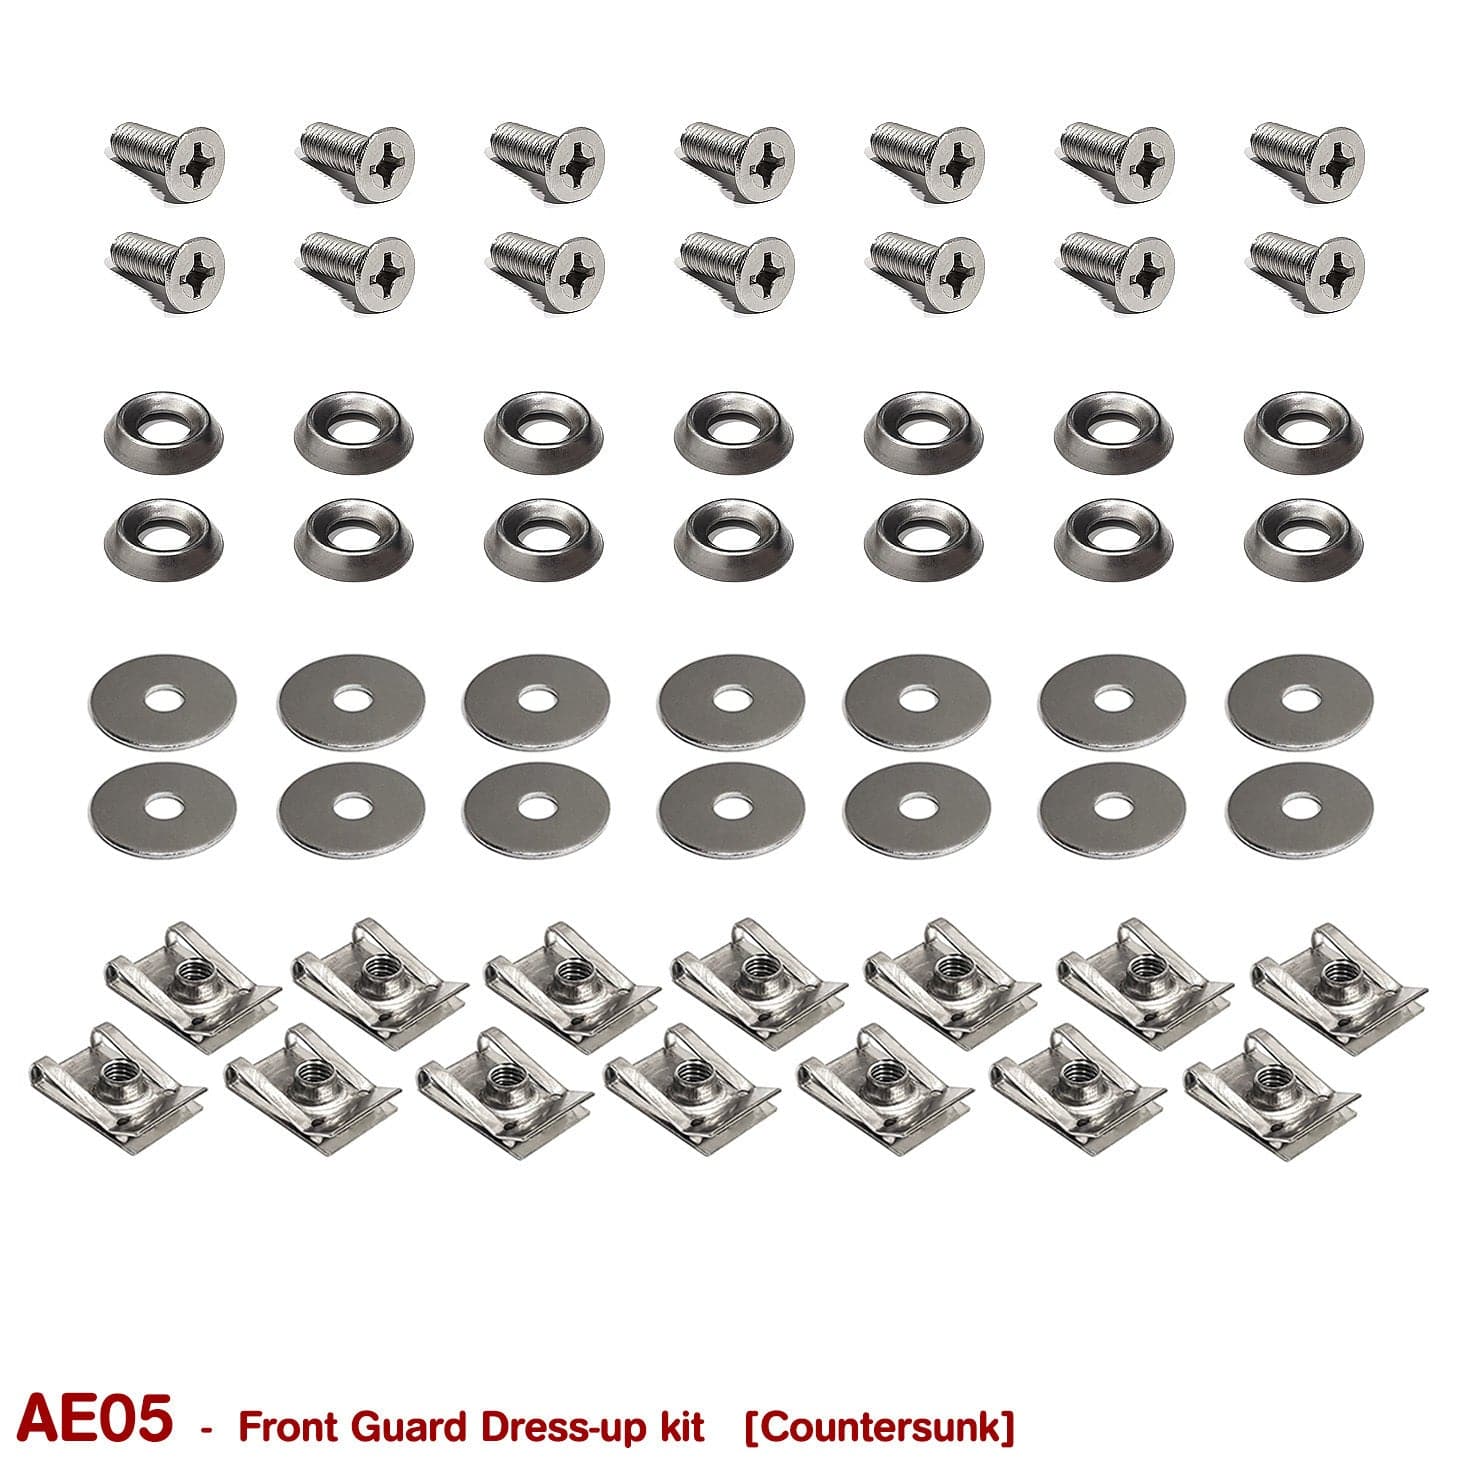 FRONT GUARD STAINLESS COUNTERSUNK DRESS UP KIT